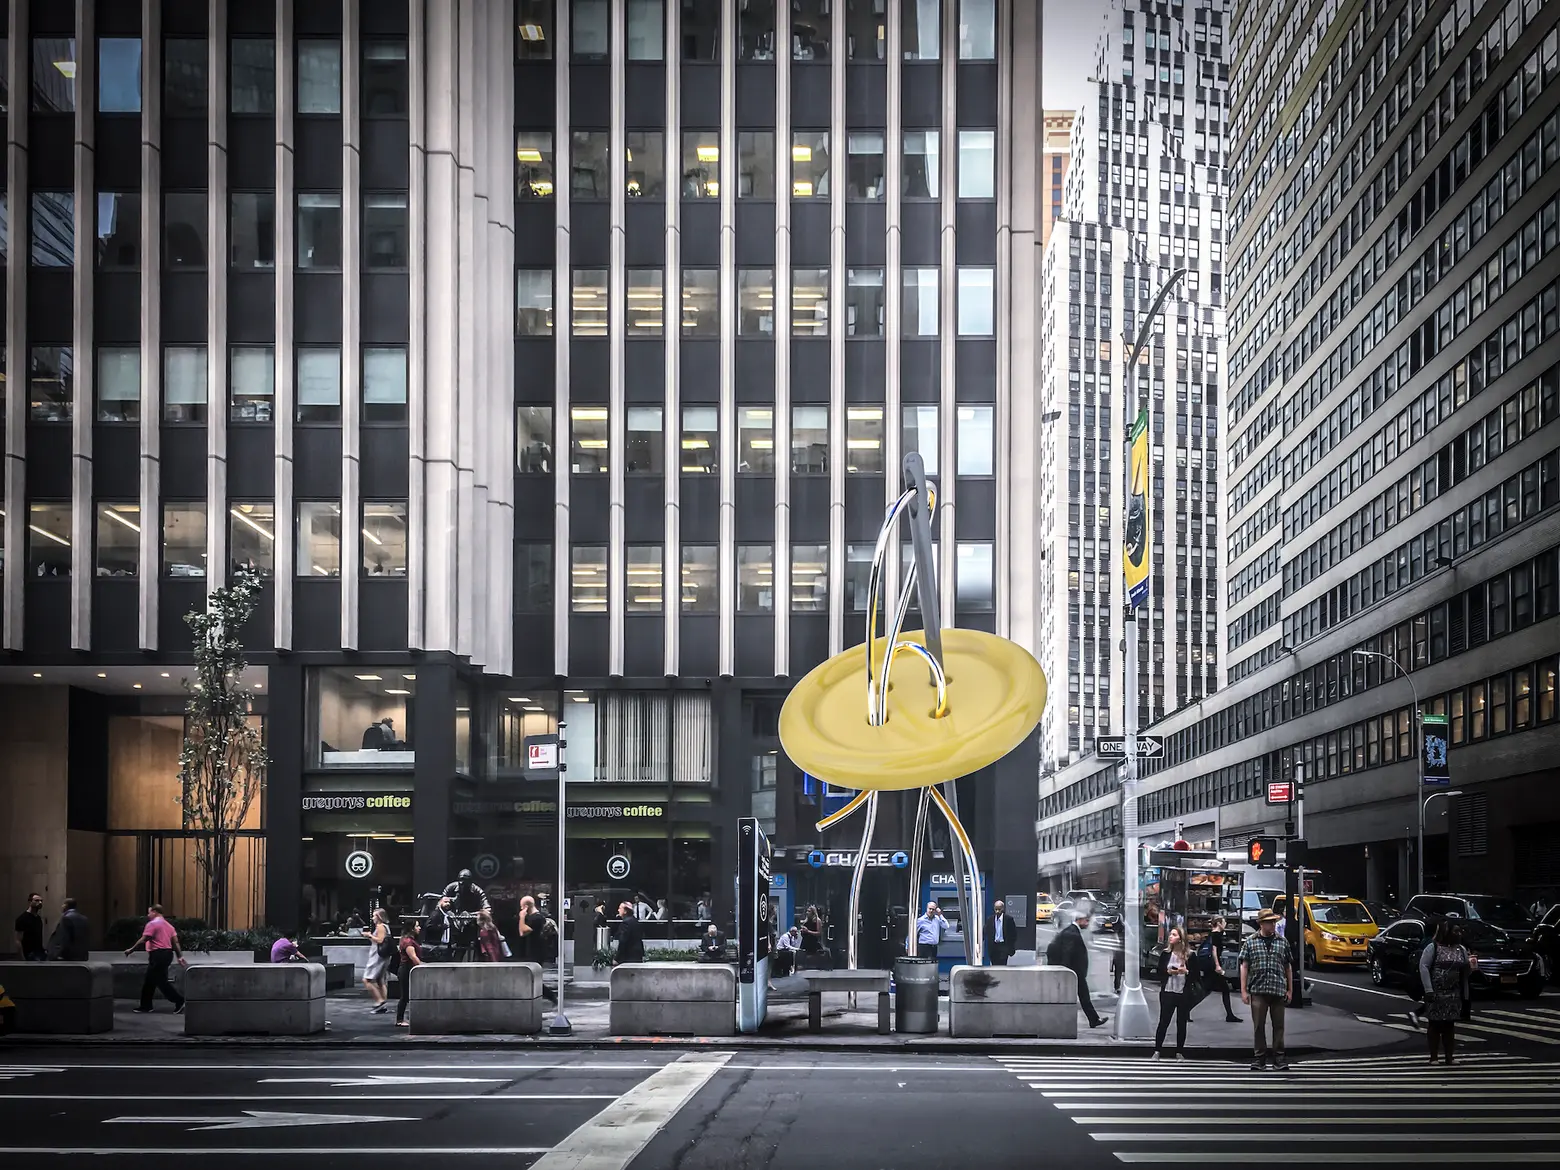 The Garment District’s iconic button & needle kiosk will be redesigned